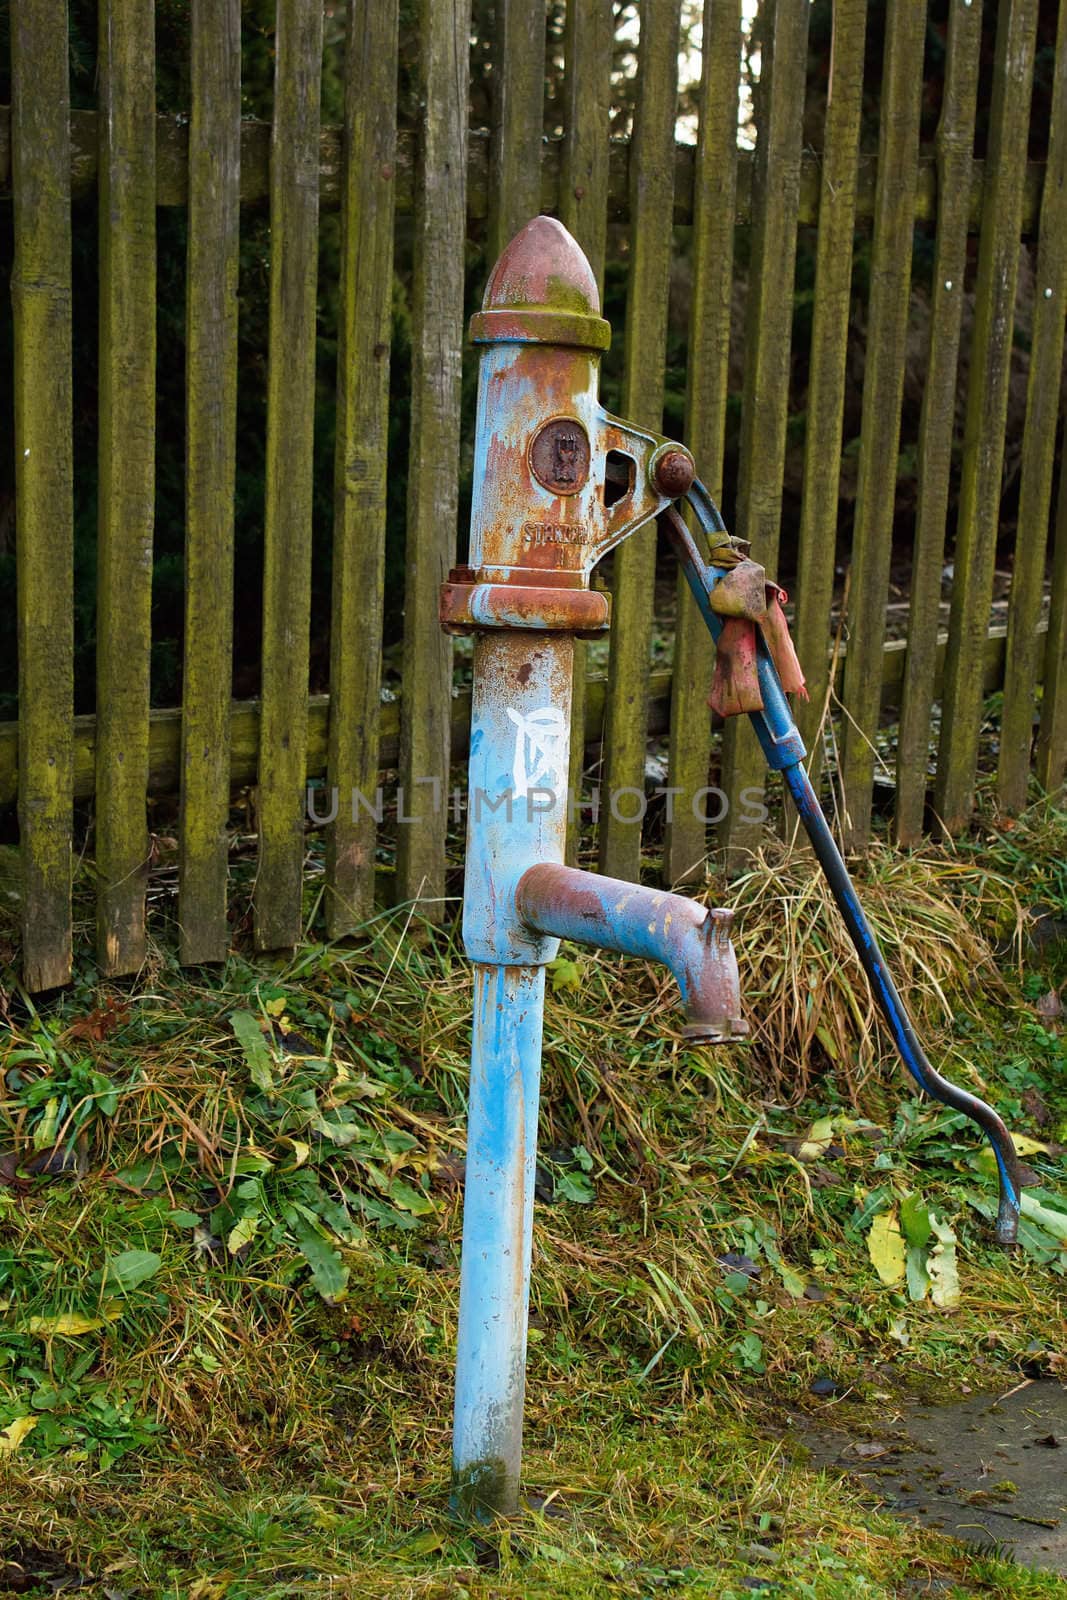 Countryside old water pump by artush